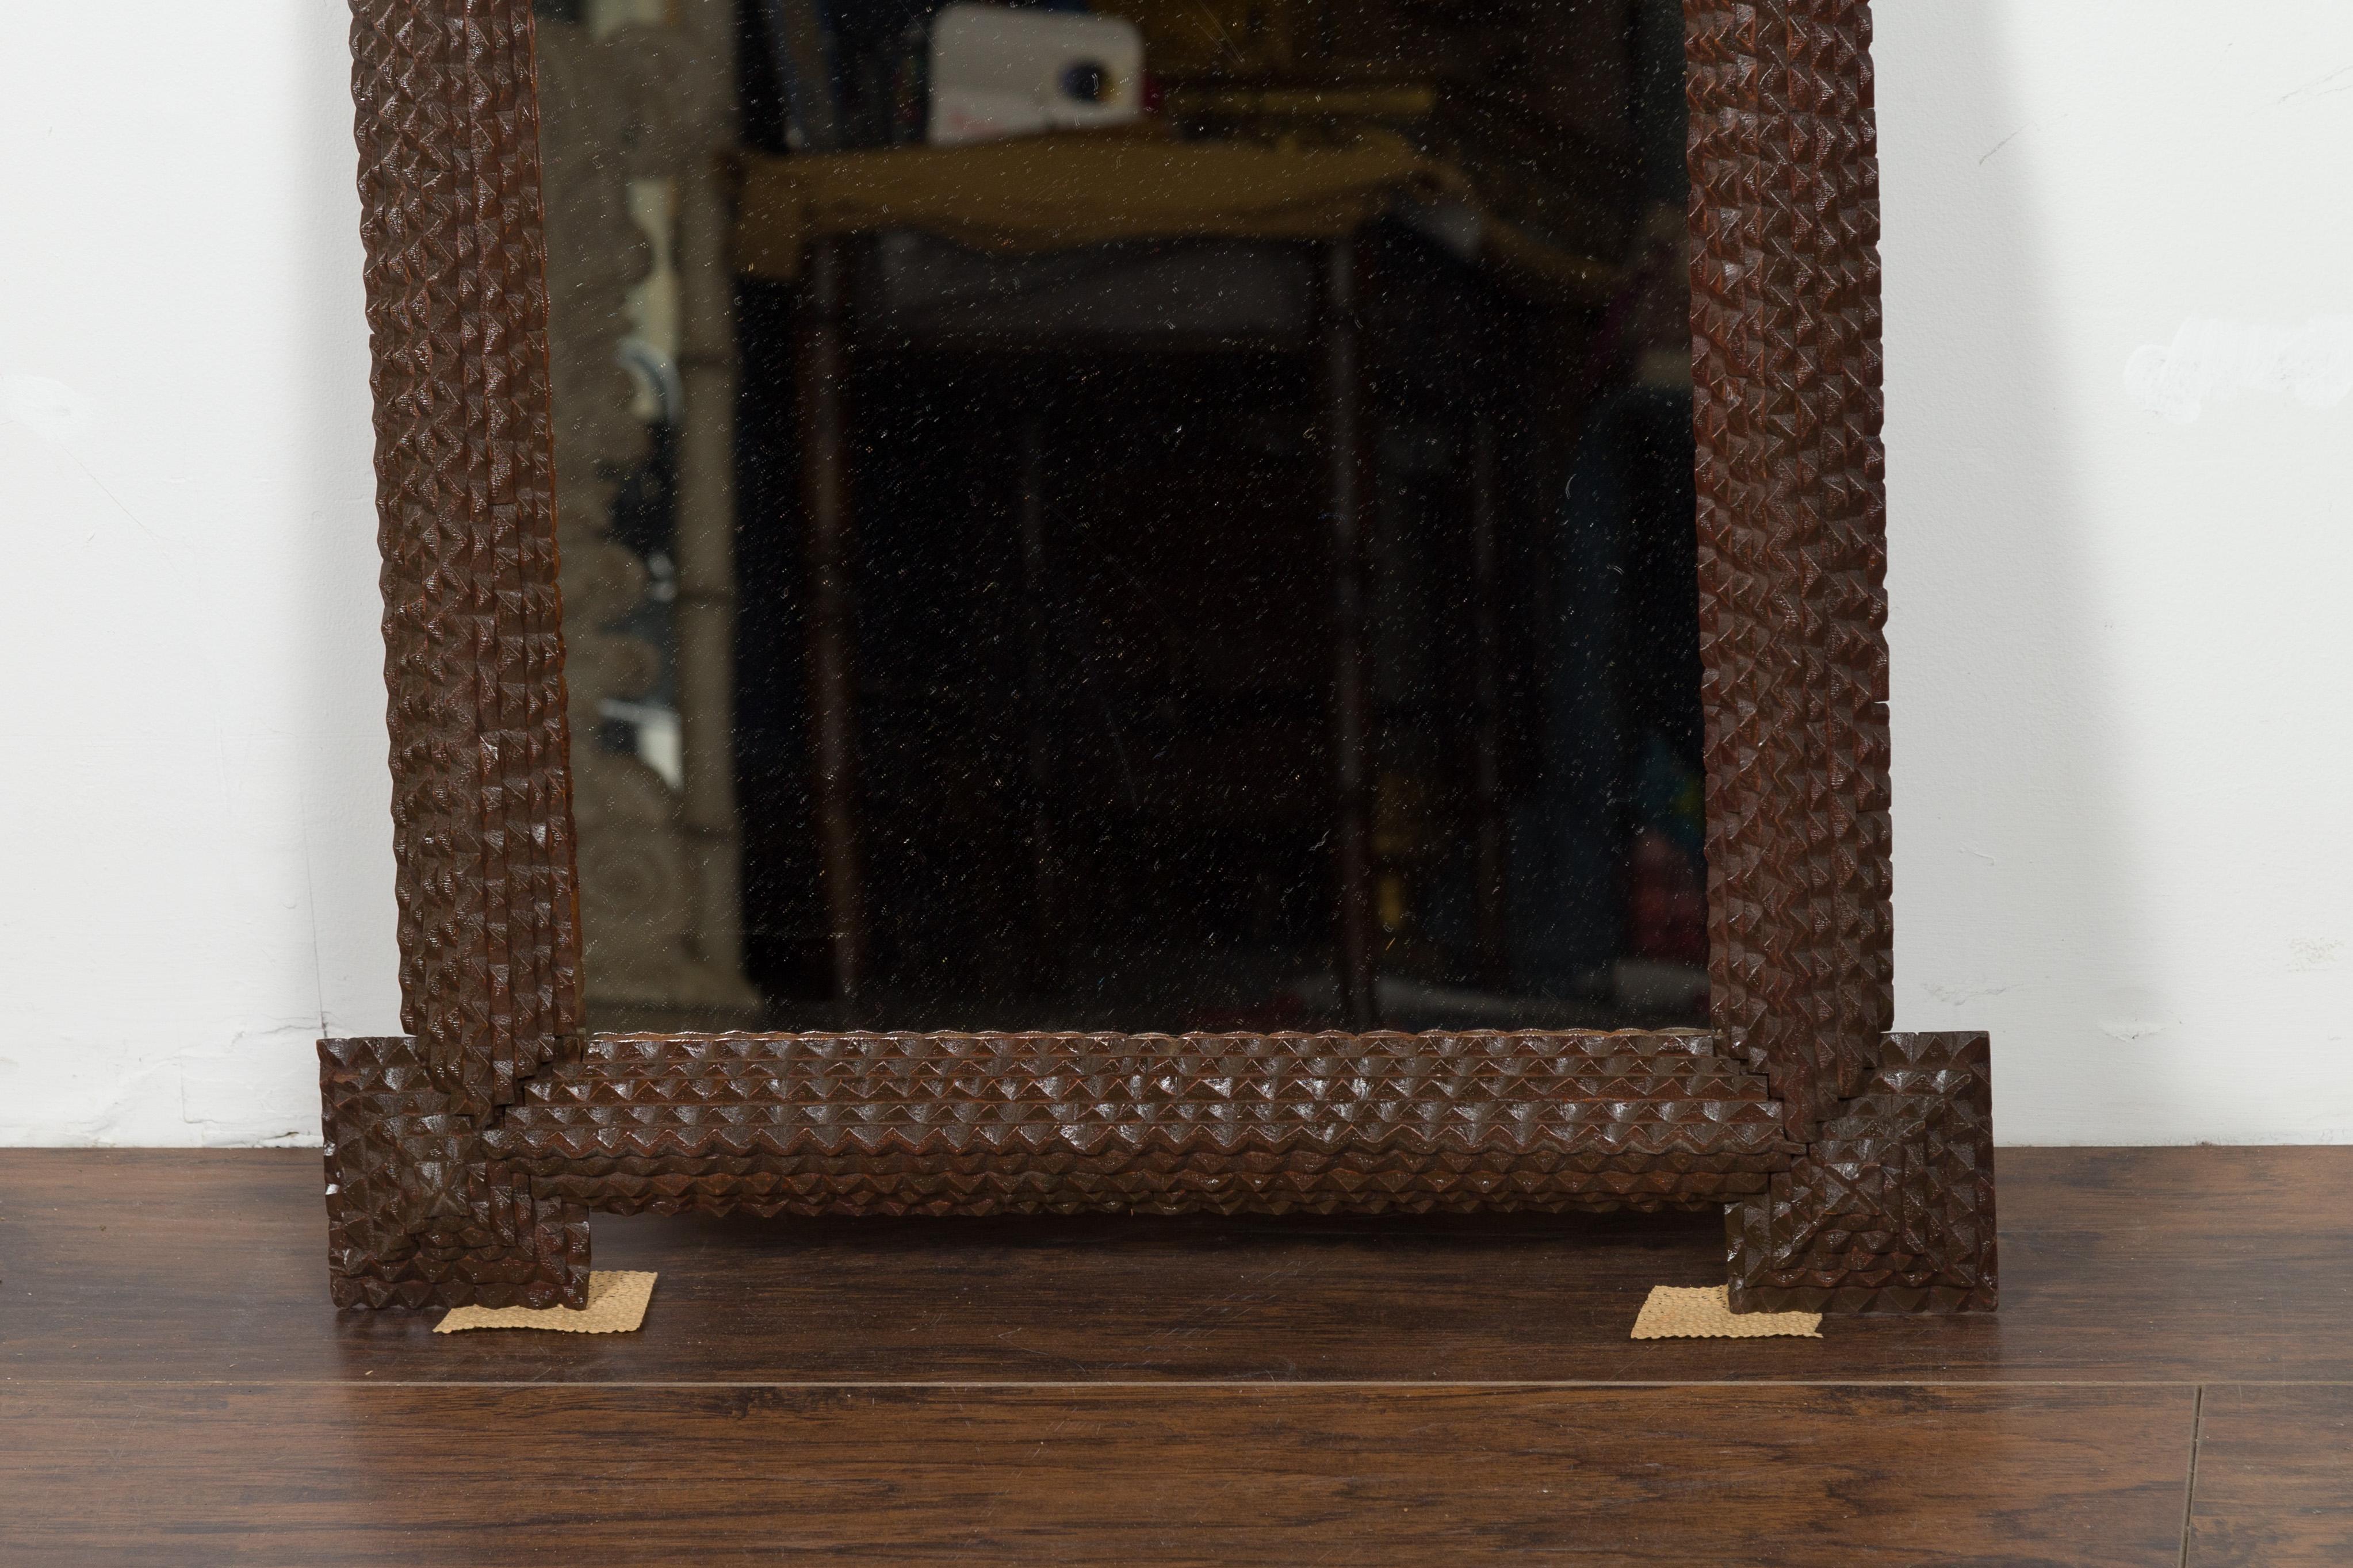 20th Century French 1900s Tramp Art Mirror with Protruding Corners and Pyramidal Motifs